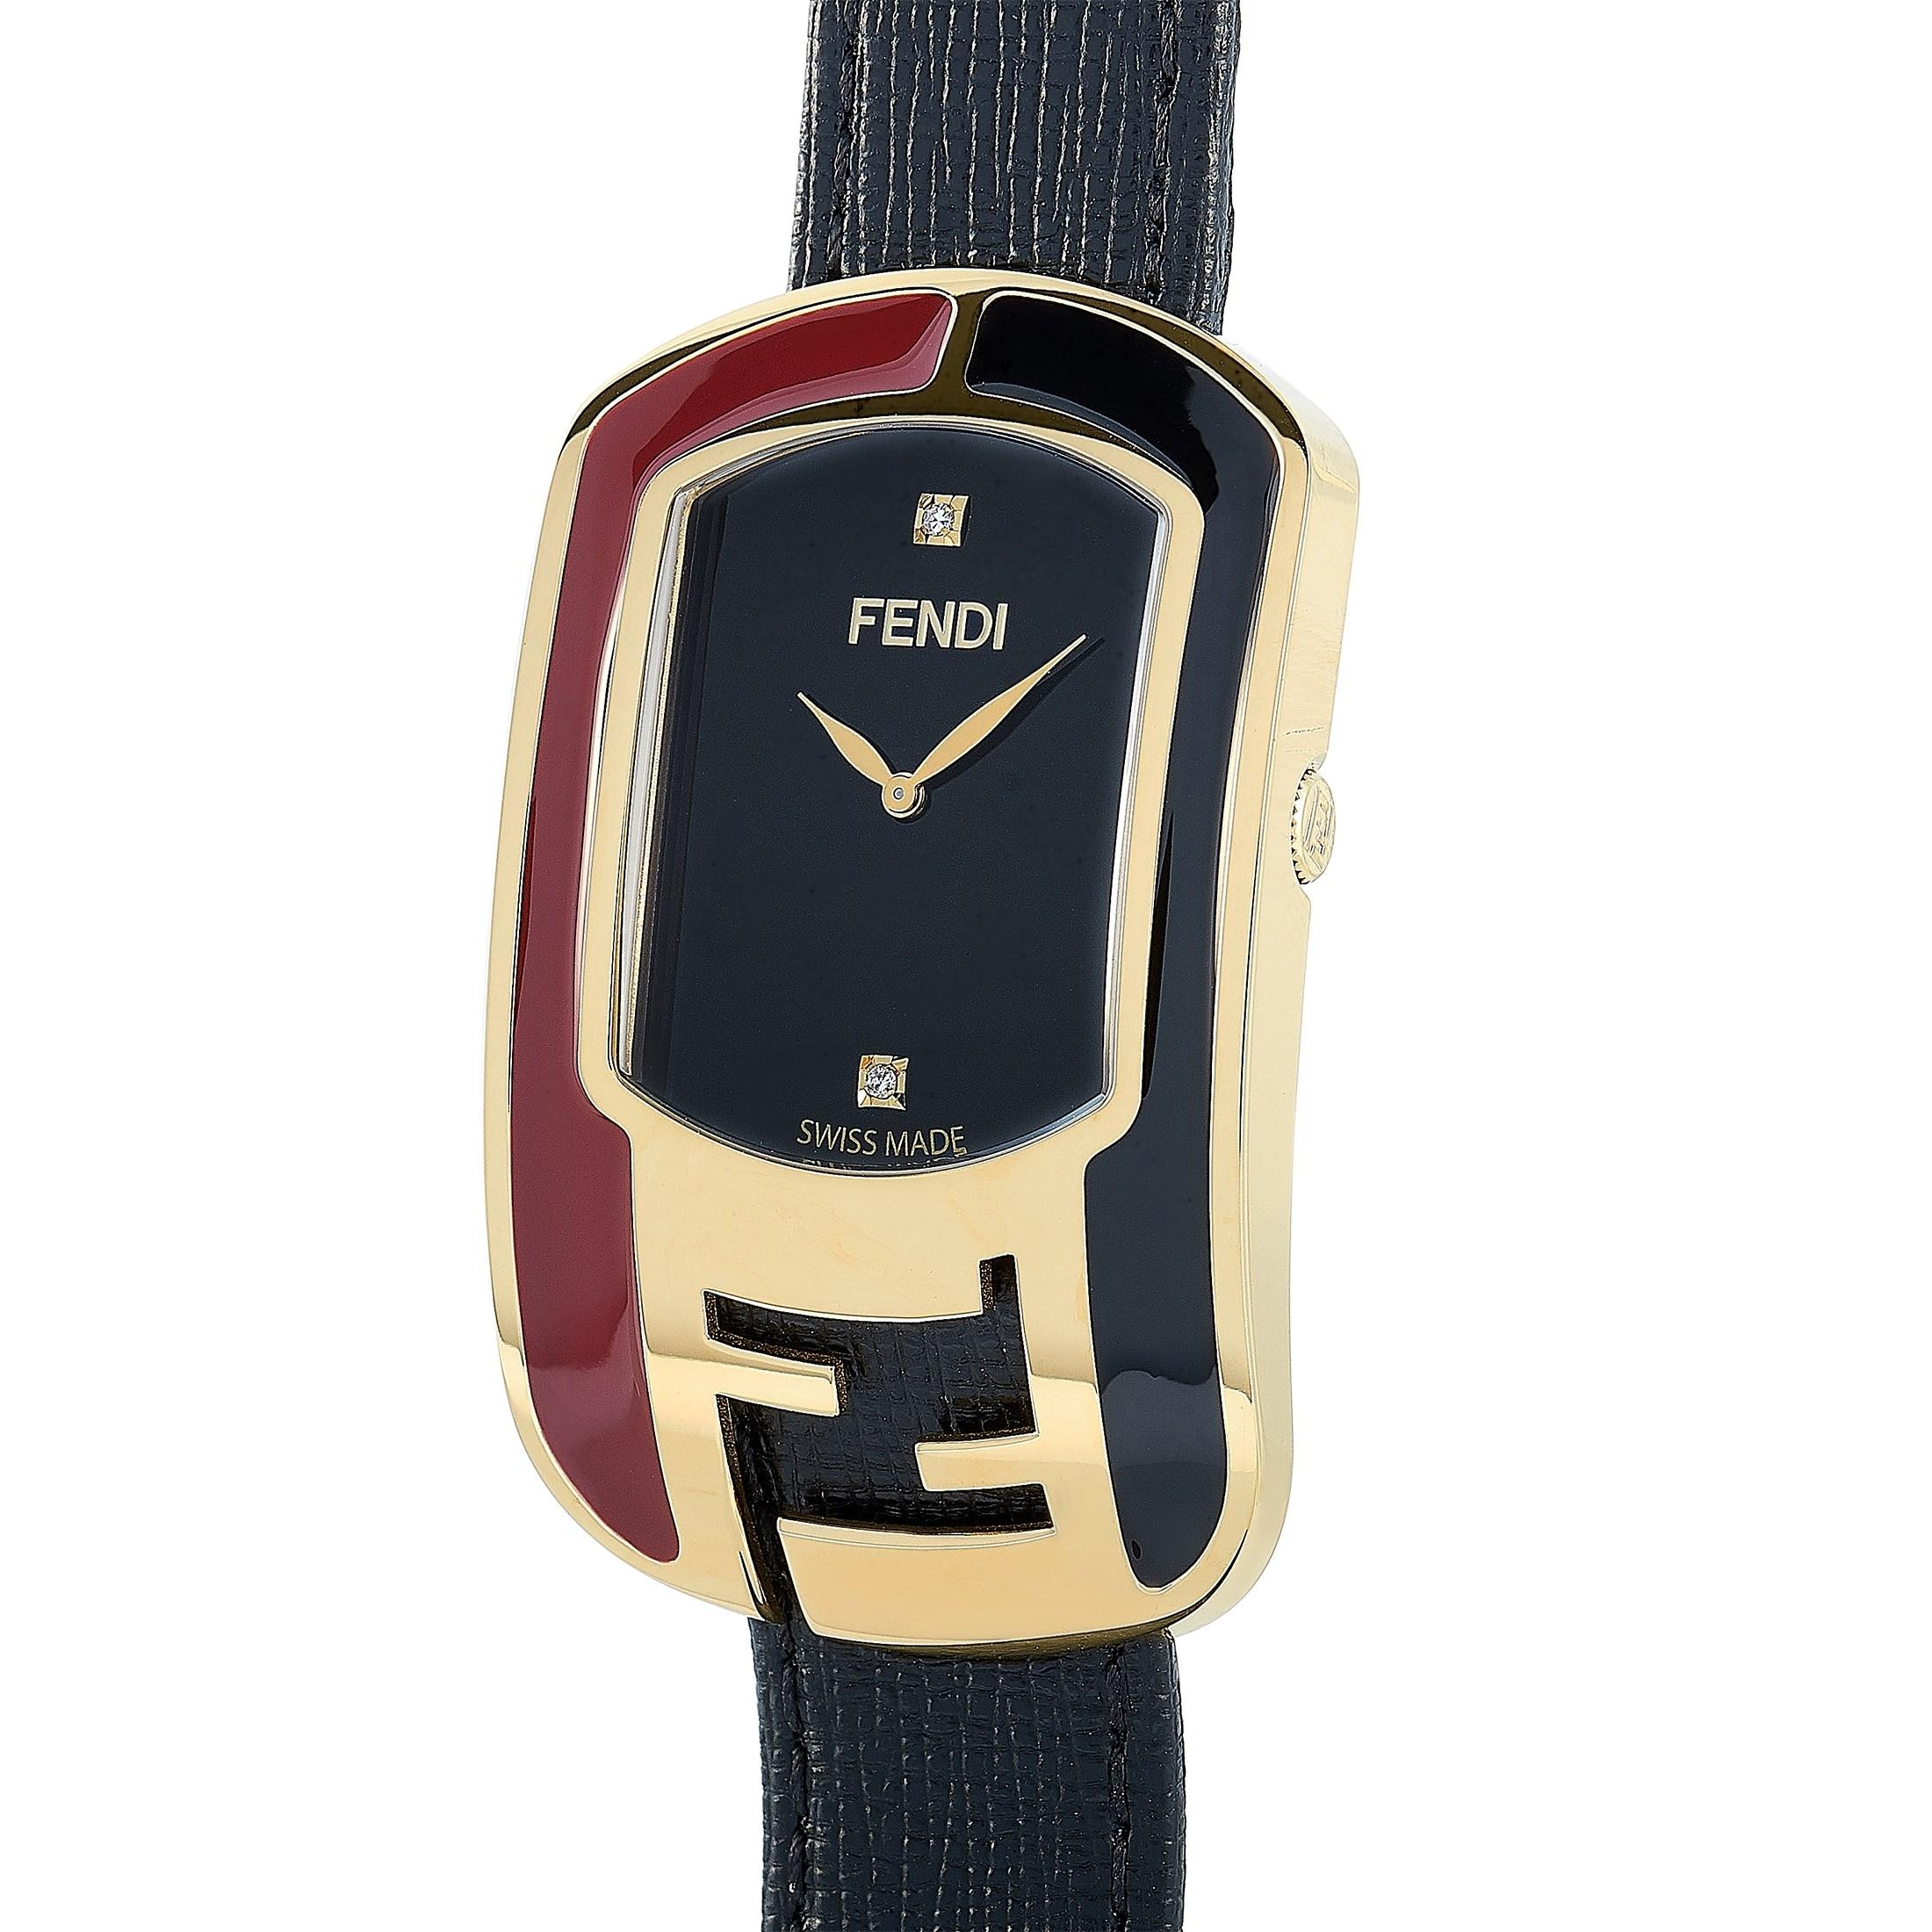 The Fendi Chameleon watch, reference number F322431011D1, boasts a gold-tone stainless steel case that is presented on a black leather strap, secured on the wrist with a tang buckle. This model is powered by a quartz movement and indicates hours and